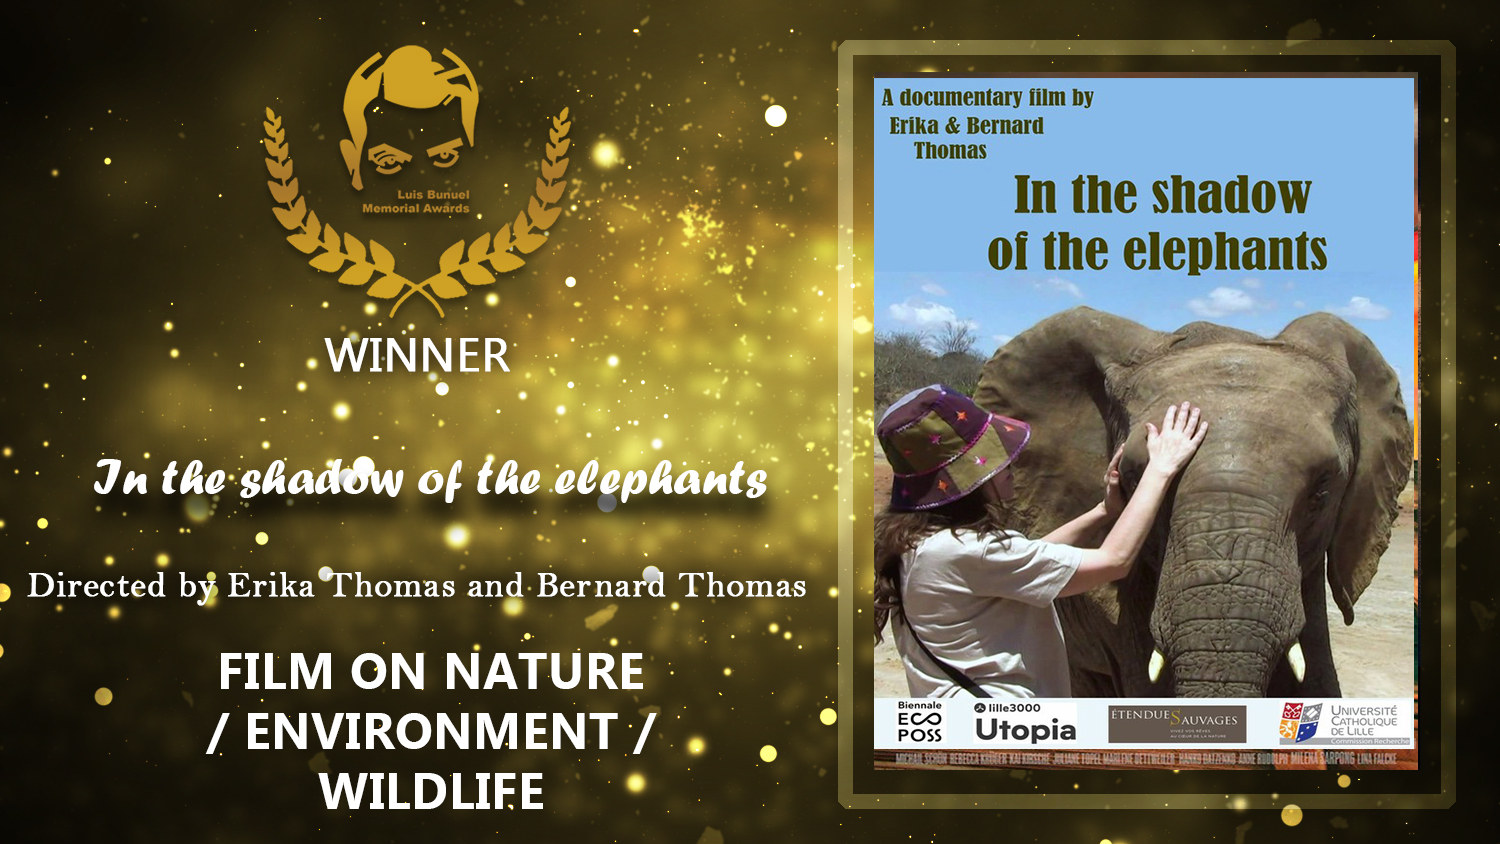 In the shadow of the elephants Film on Nature Environment Wildlife LBMA _ WFCN